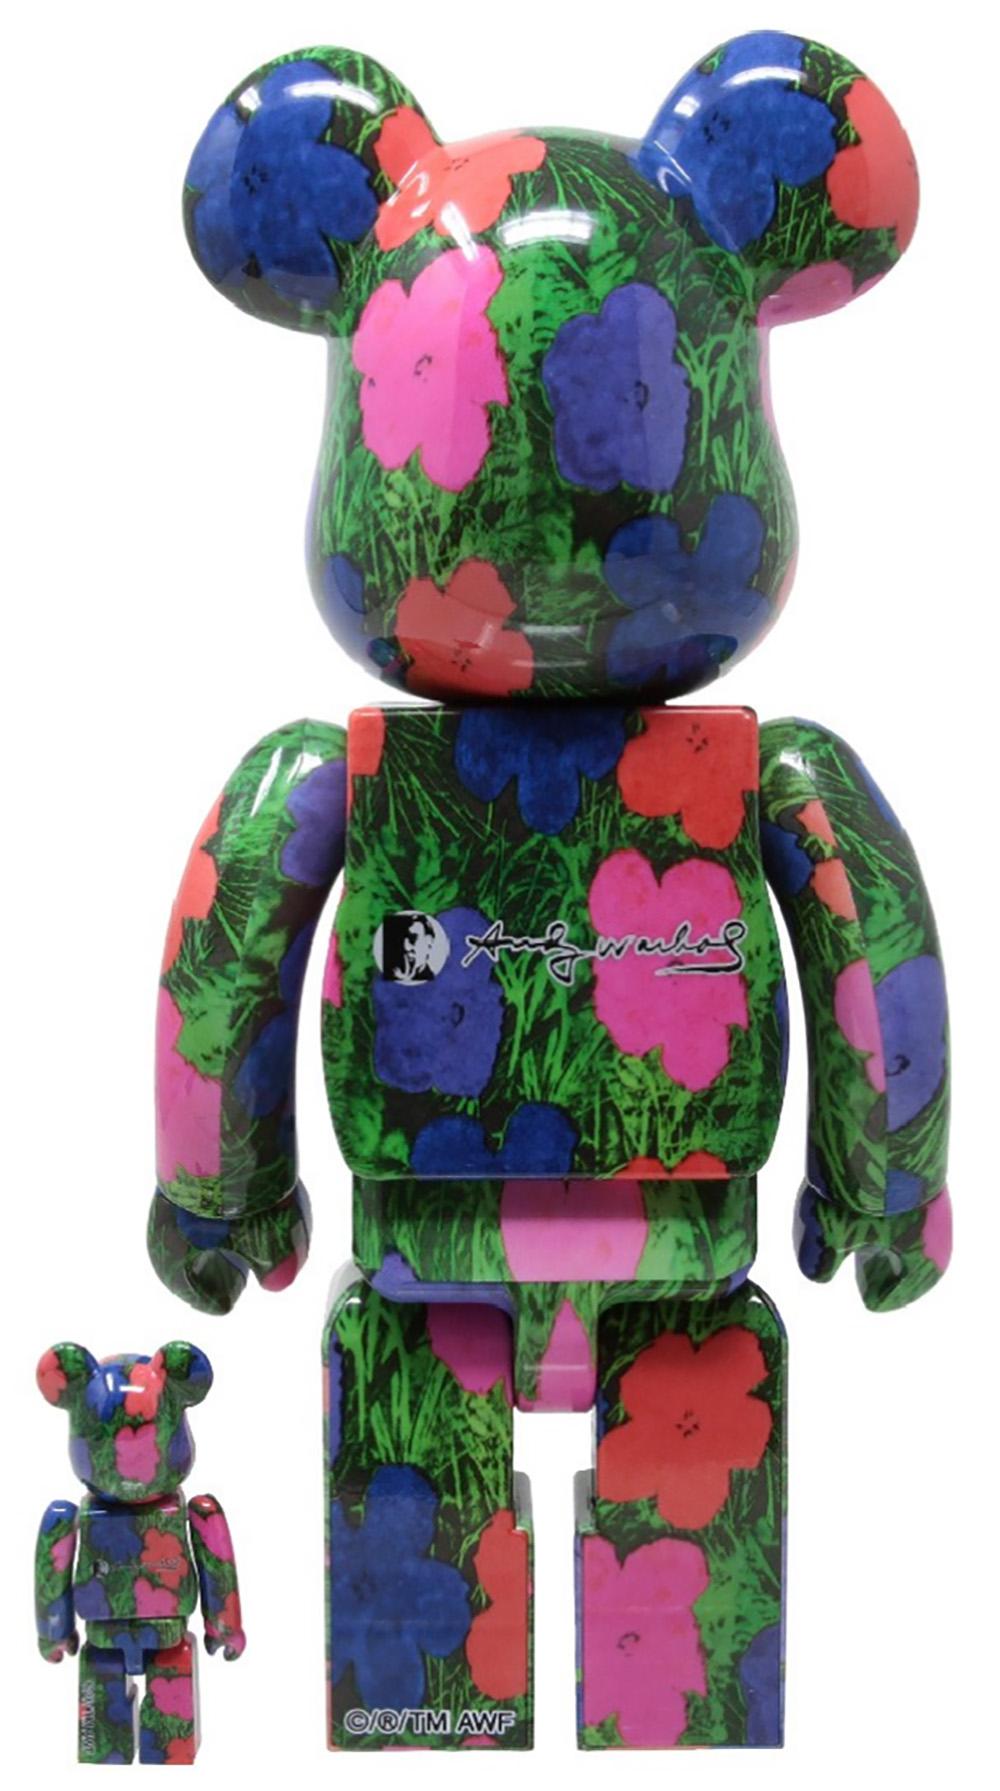 Andy Warhol Flowers Bearbrick 400% Companion (Warhol BE@RBRICK 400%) - Contemporary Print by (after) Andy Warhol